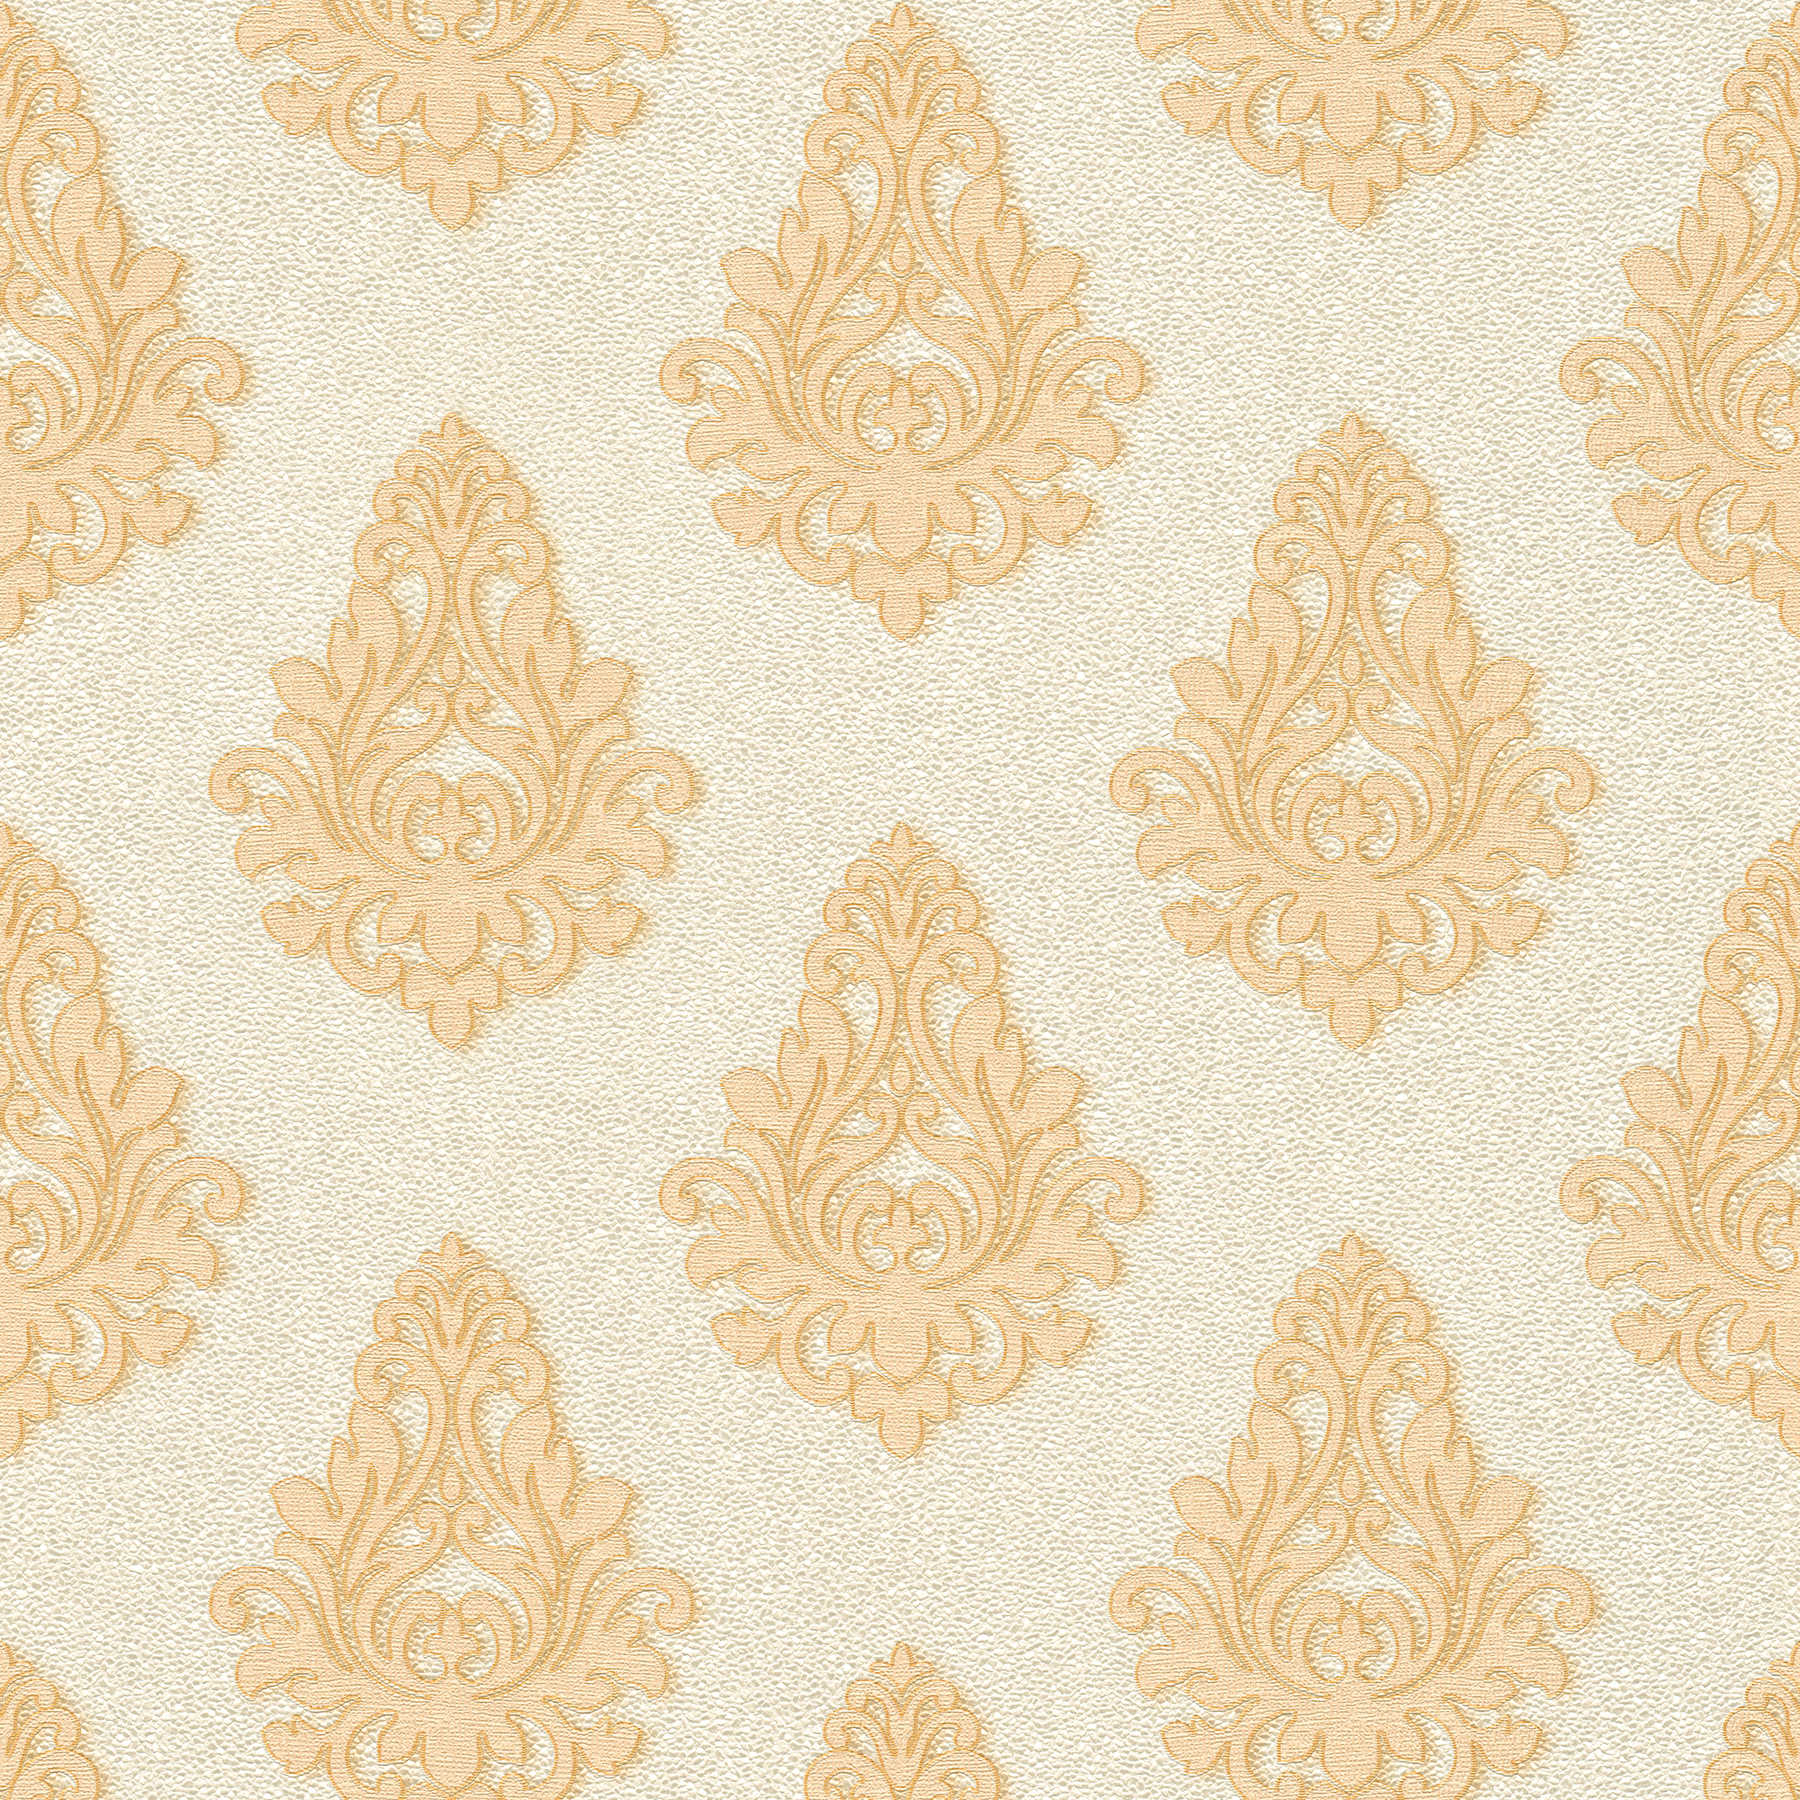 Ornament wallpaper textured with metallic effect - cream, gold, white
